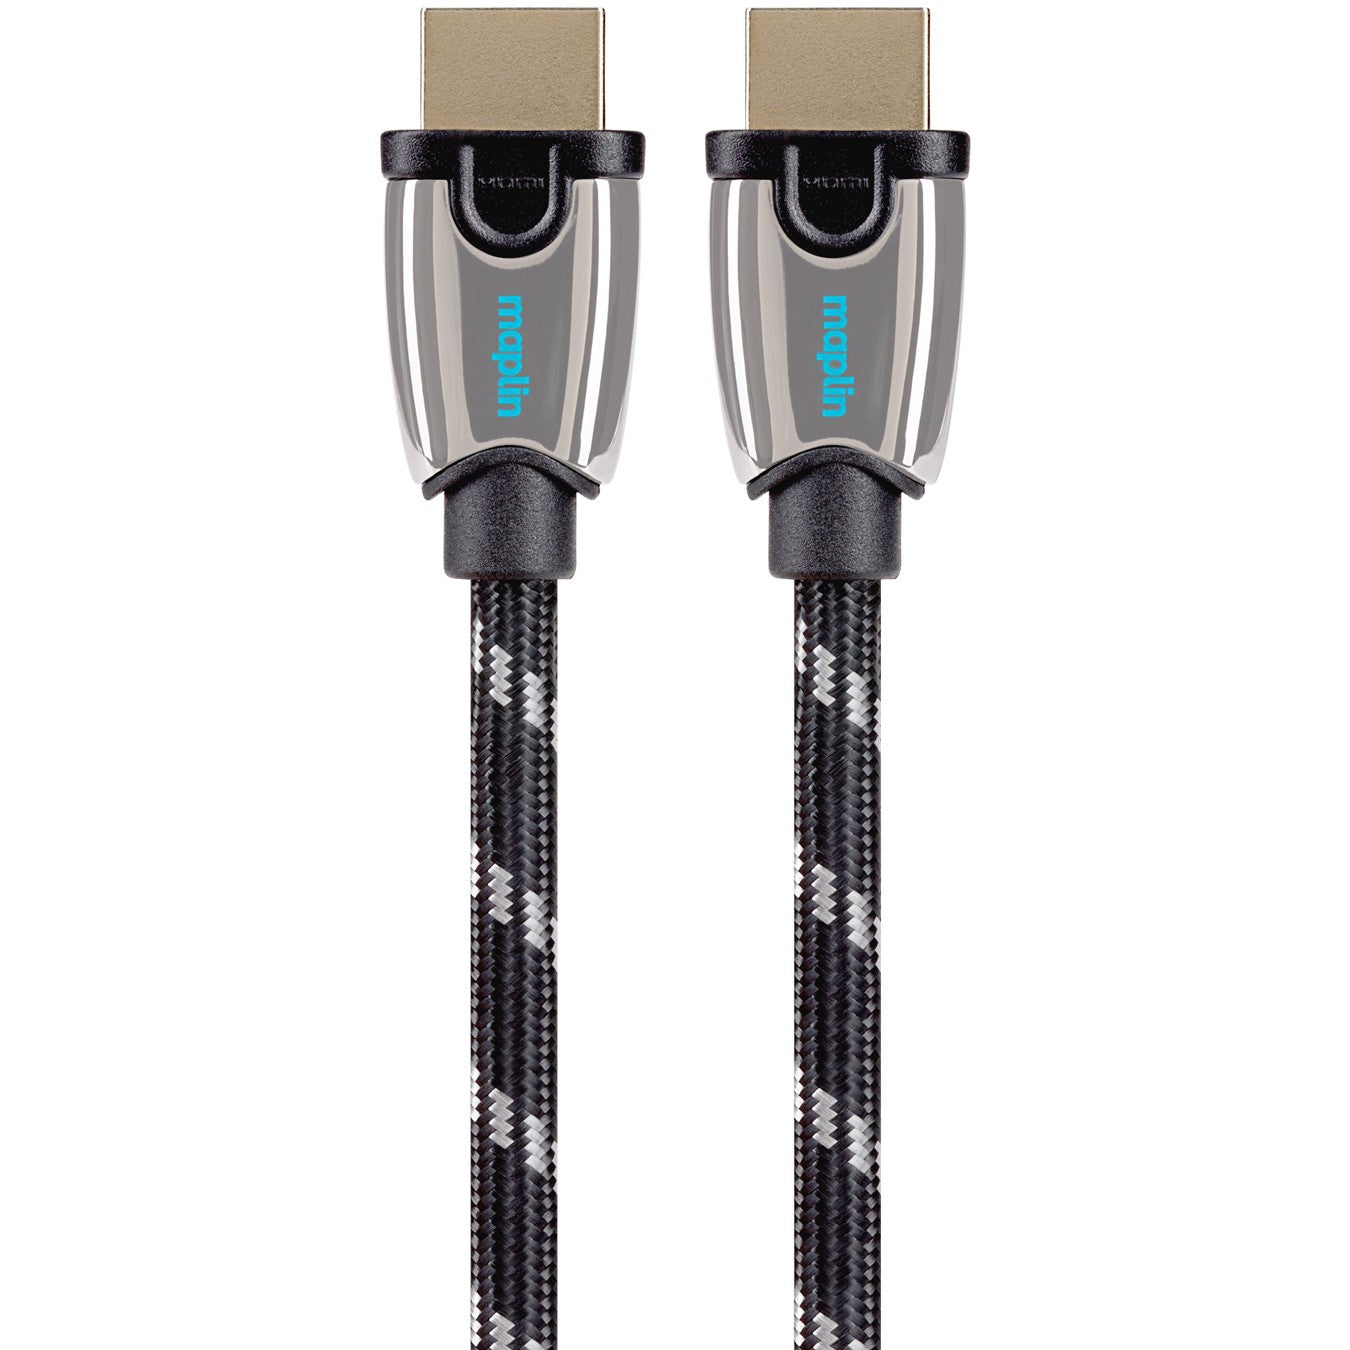 Maplin HDMI to HDMI 4K Ultra HD Braided Cable with Gold Connectors - Black, 1m